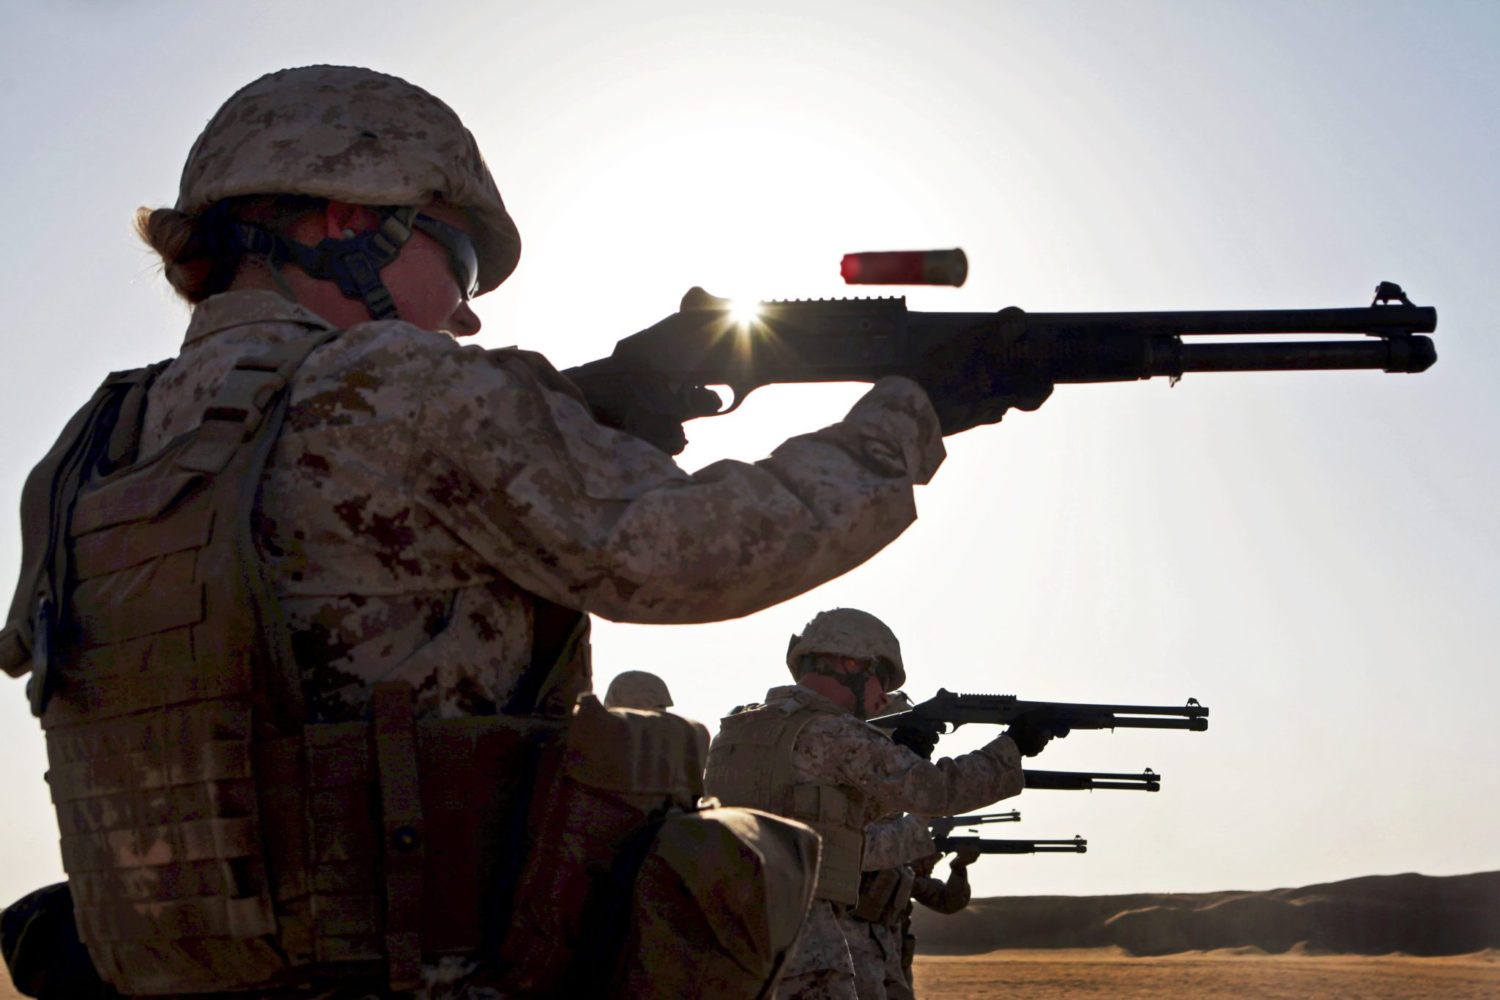 Sgt. Regina Smith, the radio supervisor and Sherevport, La., native with Combat Logistics Battalion 24, 24th Marine Expeditionary Unit, fires an M1014 shotgun during a shotgun range, Aug. 14, 2012, on Udairi Range, Kuwait. The Marines are in Kuwait as part of a 24th MEU sustainment training package. The 24th MEU is deployed with the Iwo Jima Amphibious Ready Group as a U.S. Central Command theater reserve force providing support for maritime security operations and theater security cooperation efforts in the U.S. 5th Fleet area of responsibility. (Official Marine Corps photo by Sgt. Richard Blumenstein)